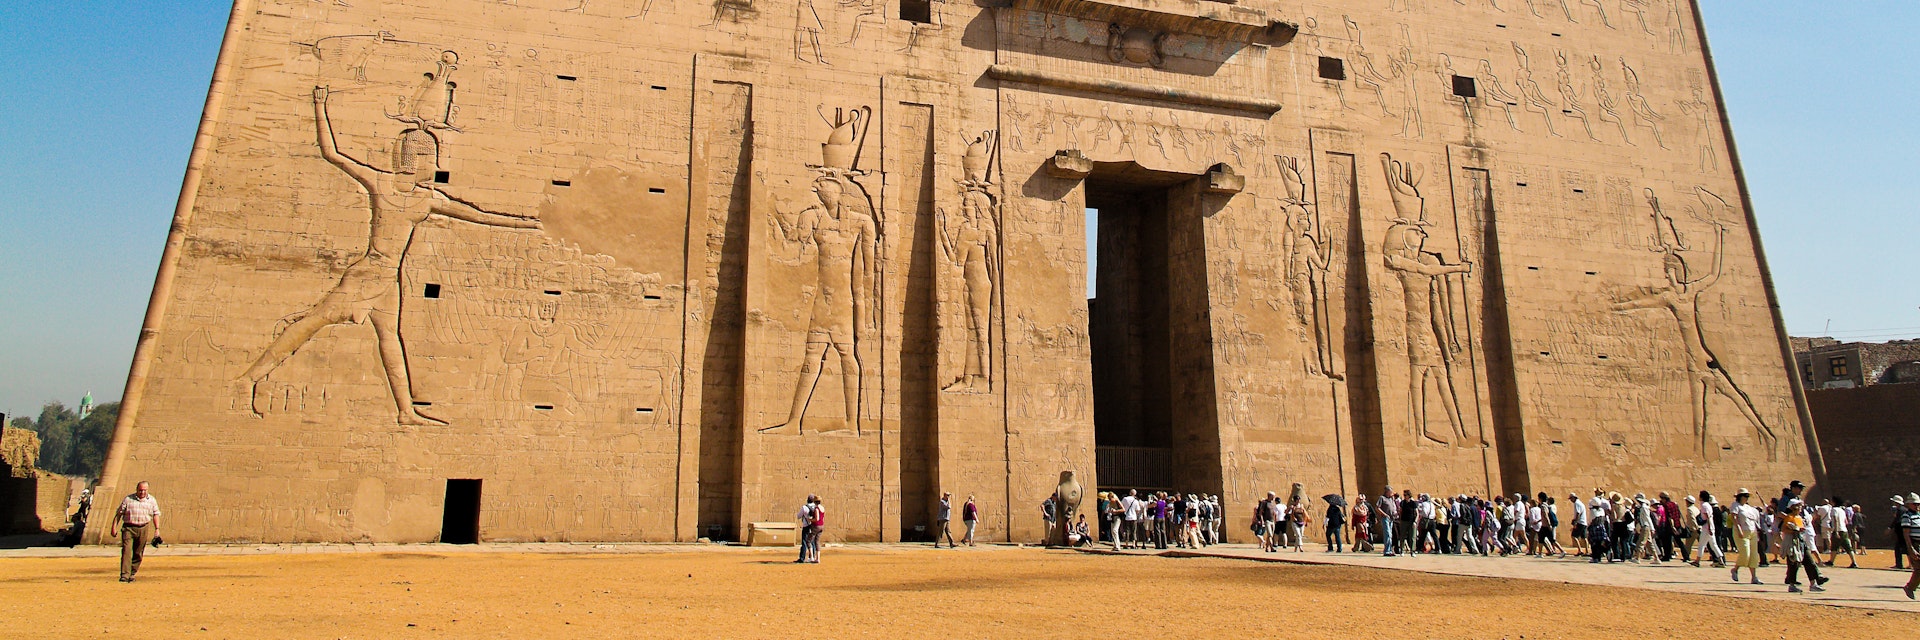 The Temple of Edfu, Egypt - from the Ptolemaic period.
76027159
edfu, egypt, horus, africa, temple, african, building, egyptian, countries, architecture